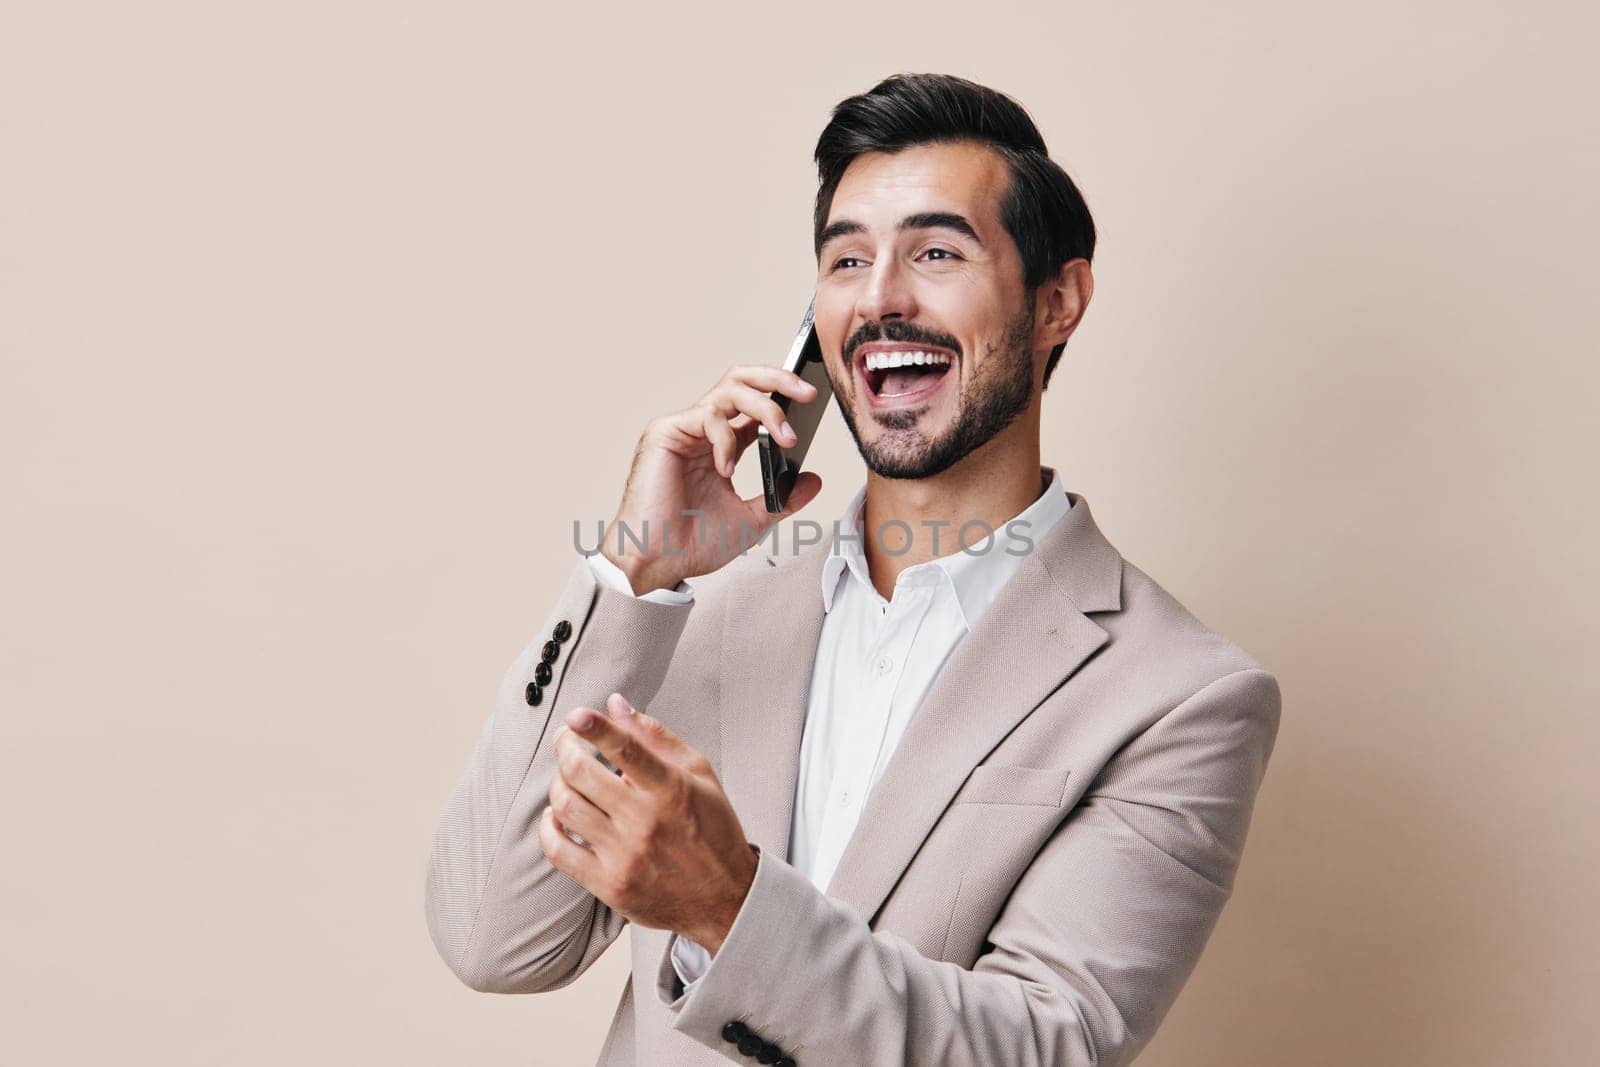 man cell adult young isolated smile person communication background studio suit businessman hold portrait internet blogger happy call phone business smartphone